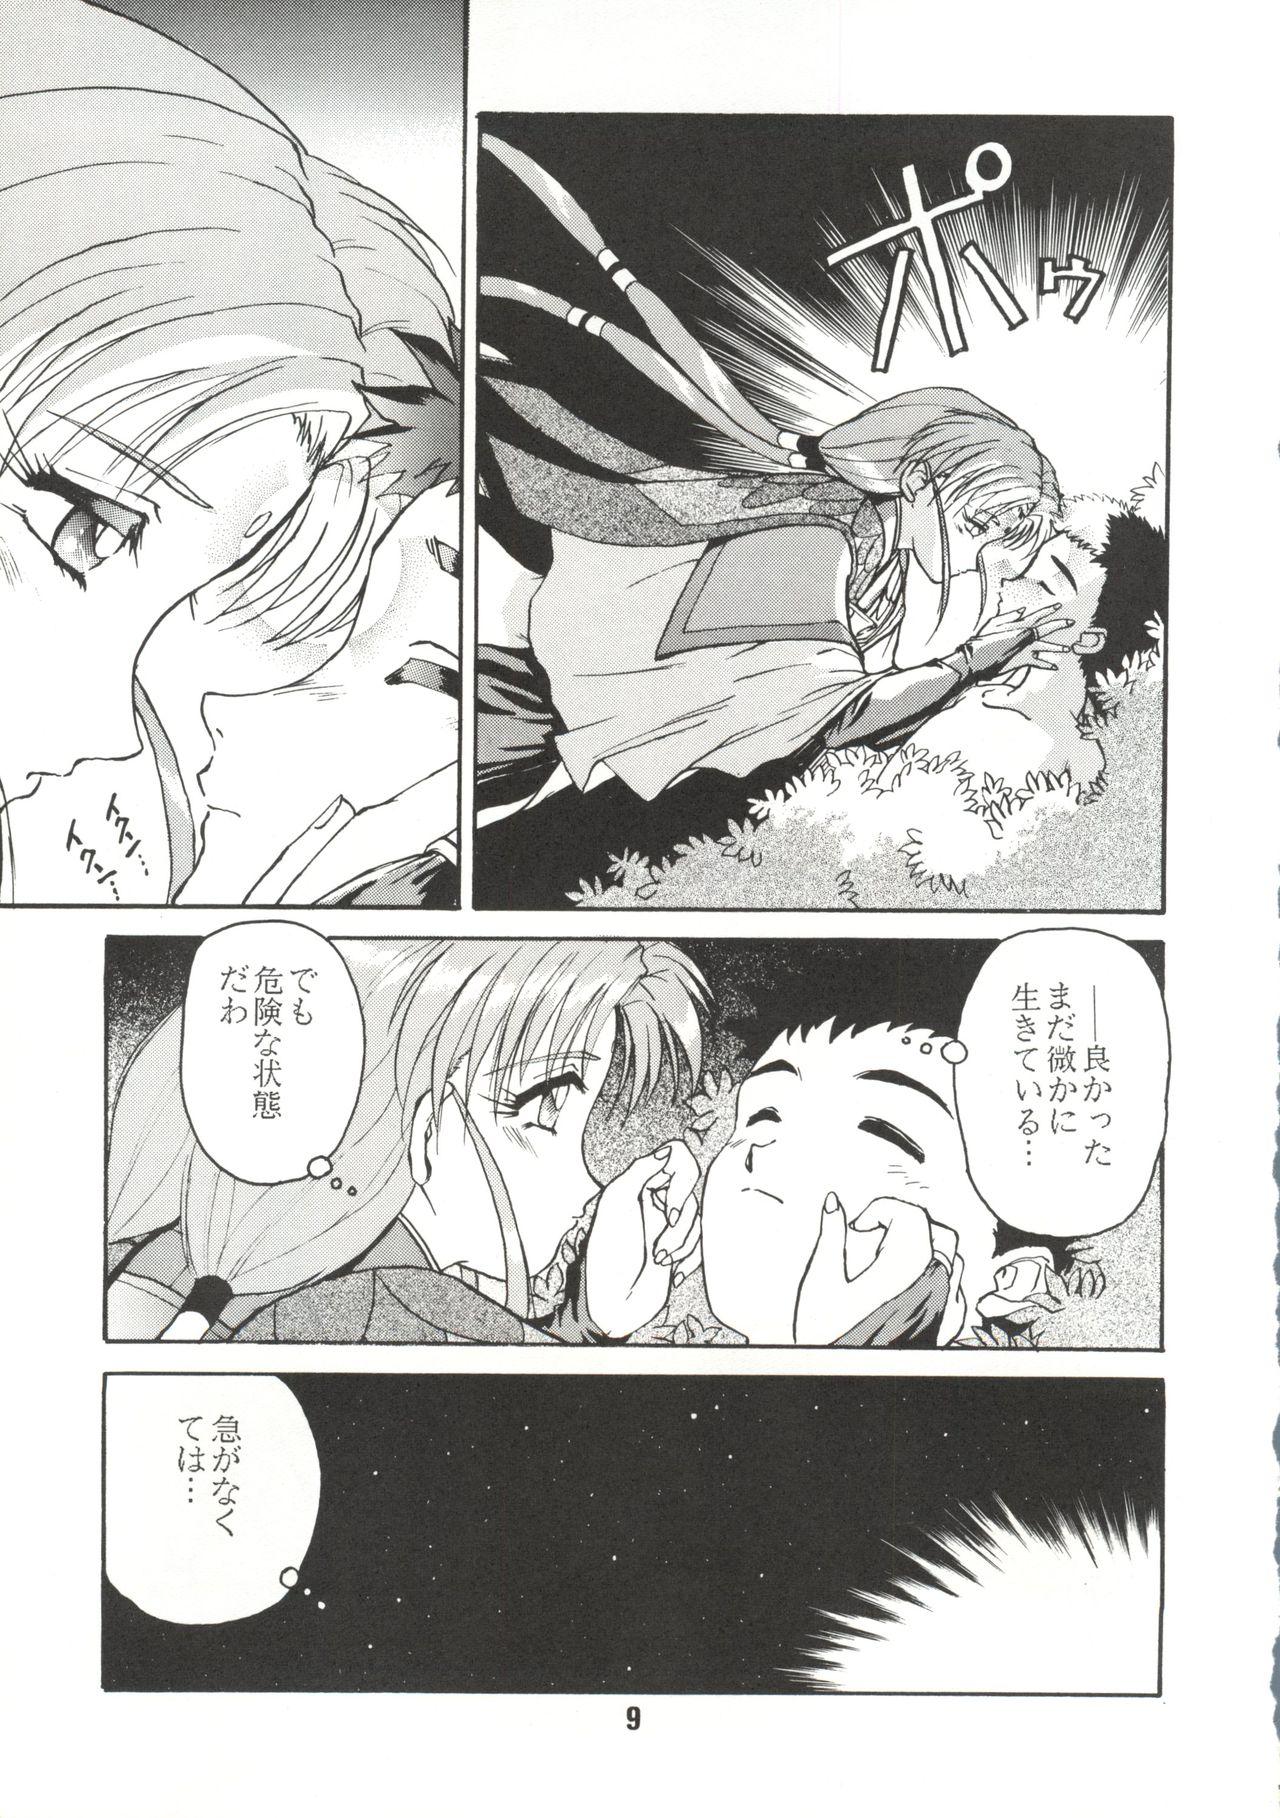 Special Locations Do Not Turn Over! Revised Edition - Tenchi muyo Gang Bang - Page 8